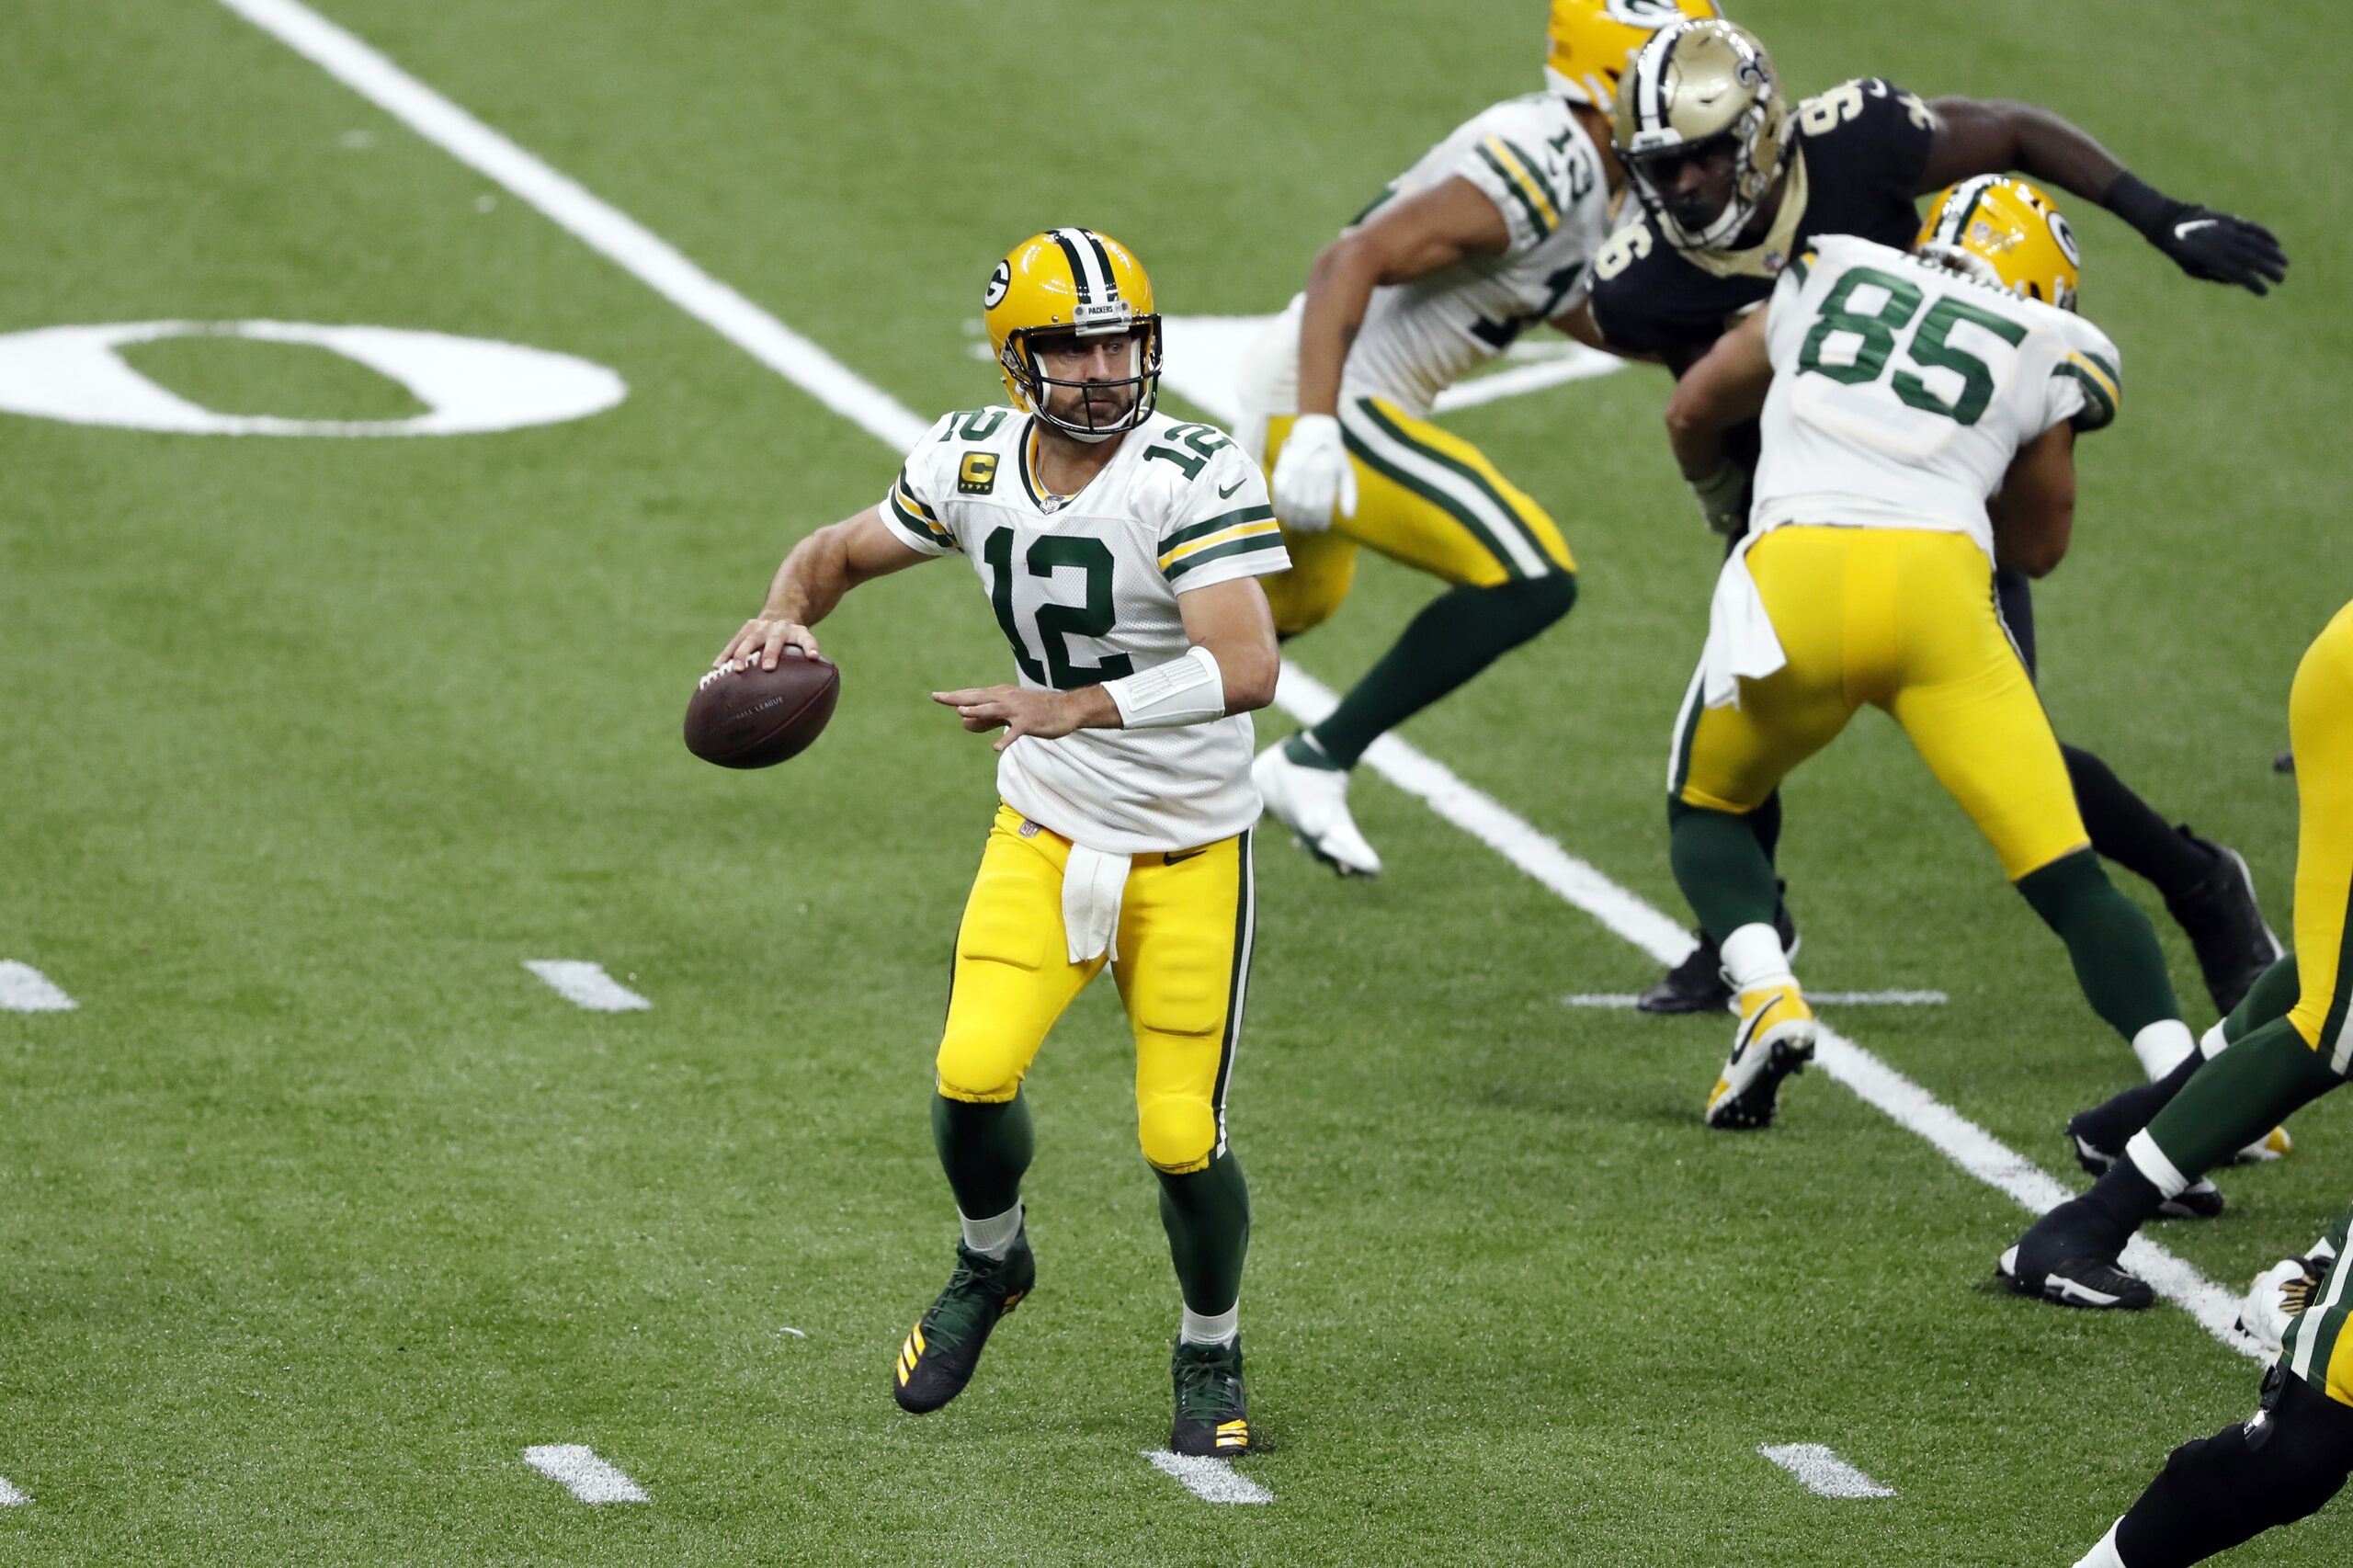 With Season Opening Sunday, Packers Are Hungry: ‘We Have Been So Close’